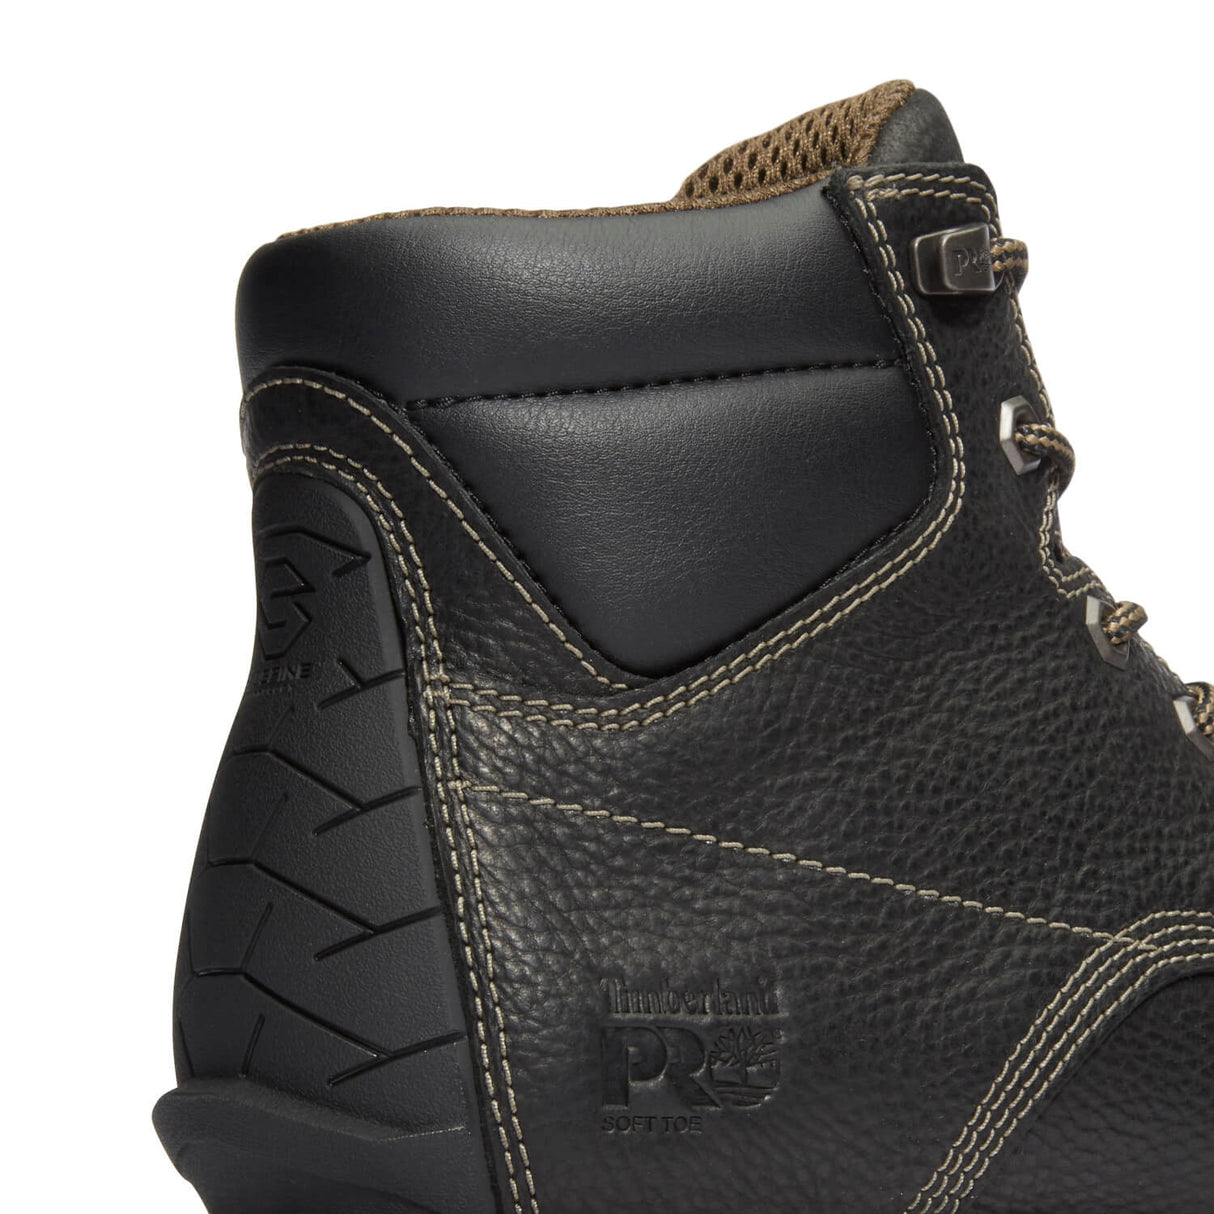 Timberland Pro-6 In Irvine Black-Steel Toes-4